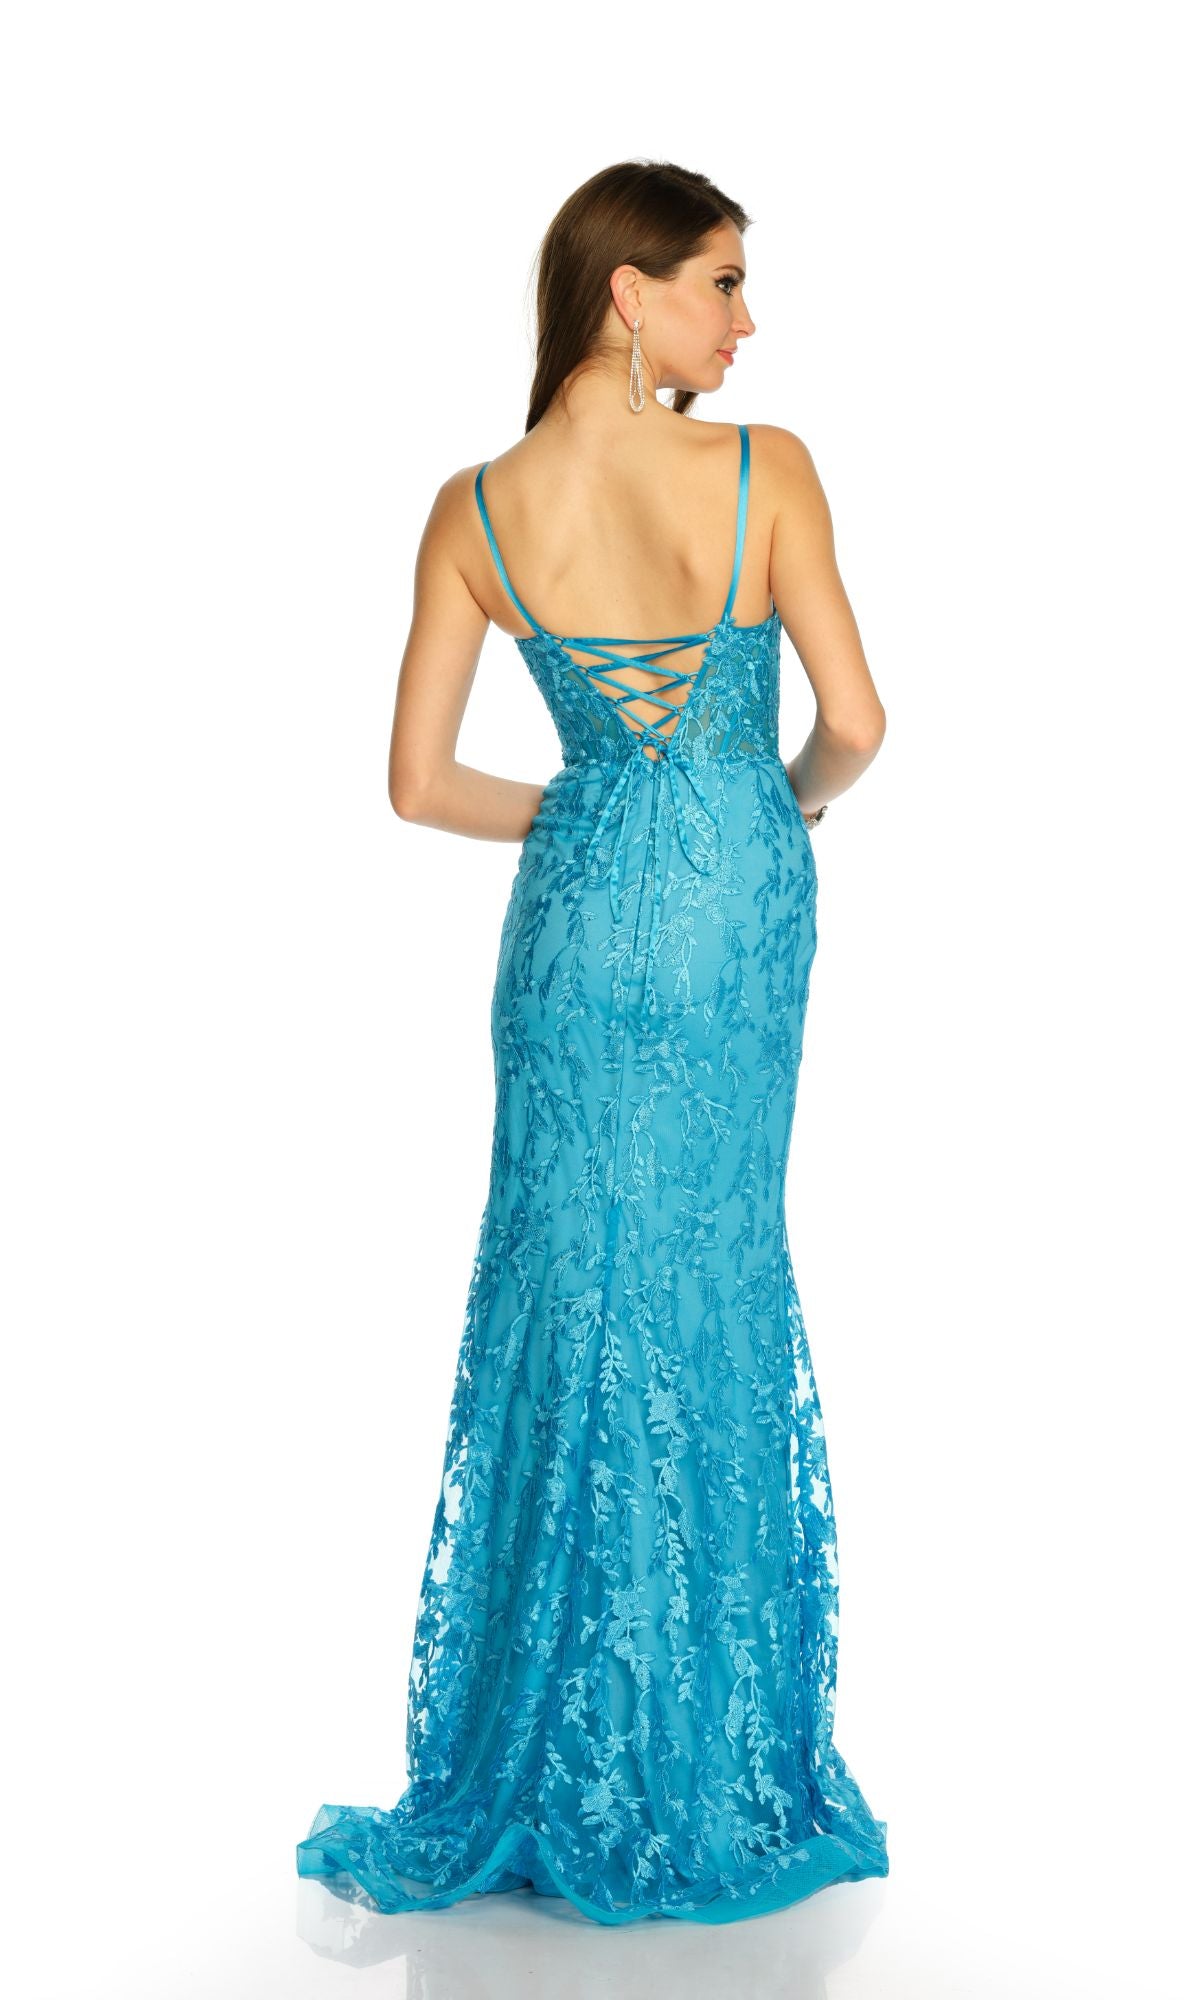 Long Formal Dress 11161 by Dave and Johnny